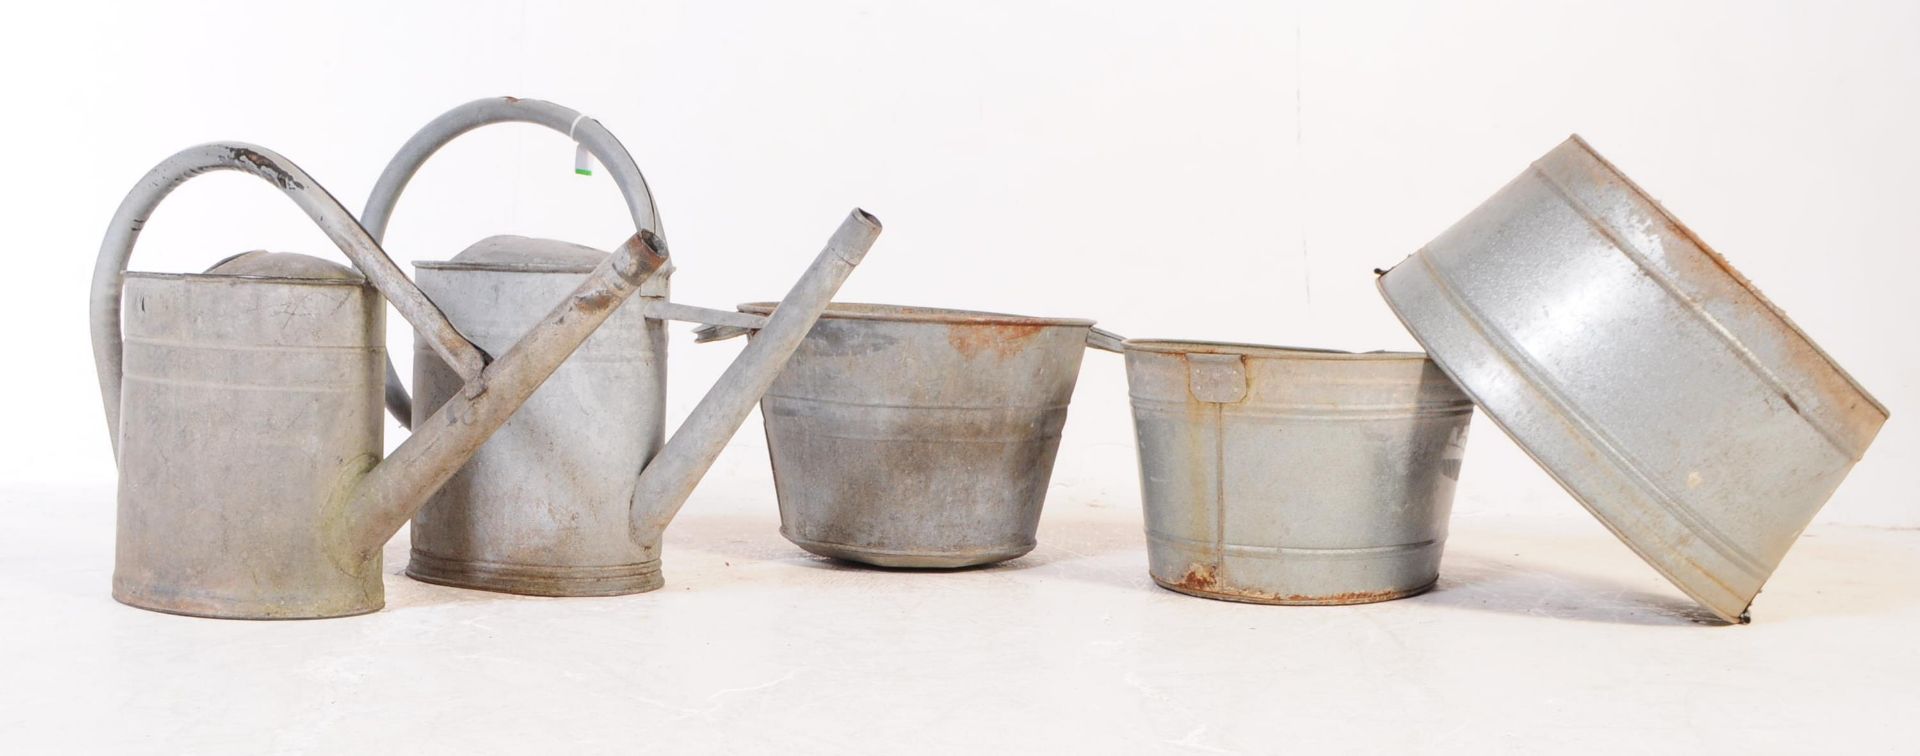 FIVE MID CENTURY GALVANISED BATH PLANTER & WATERING CANS - Image 2 of 22